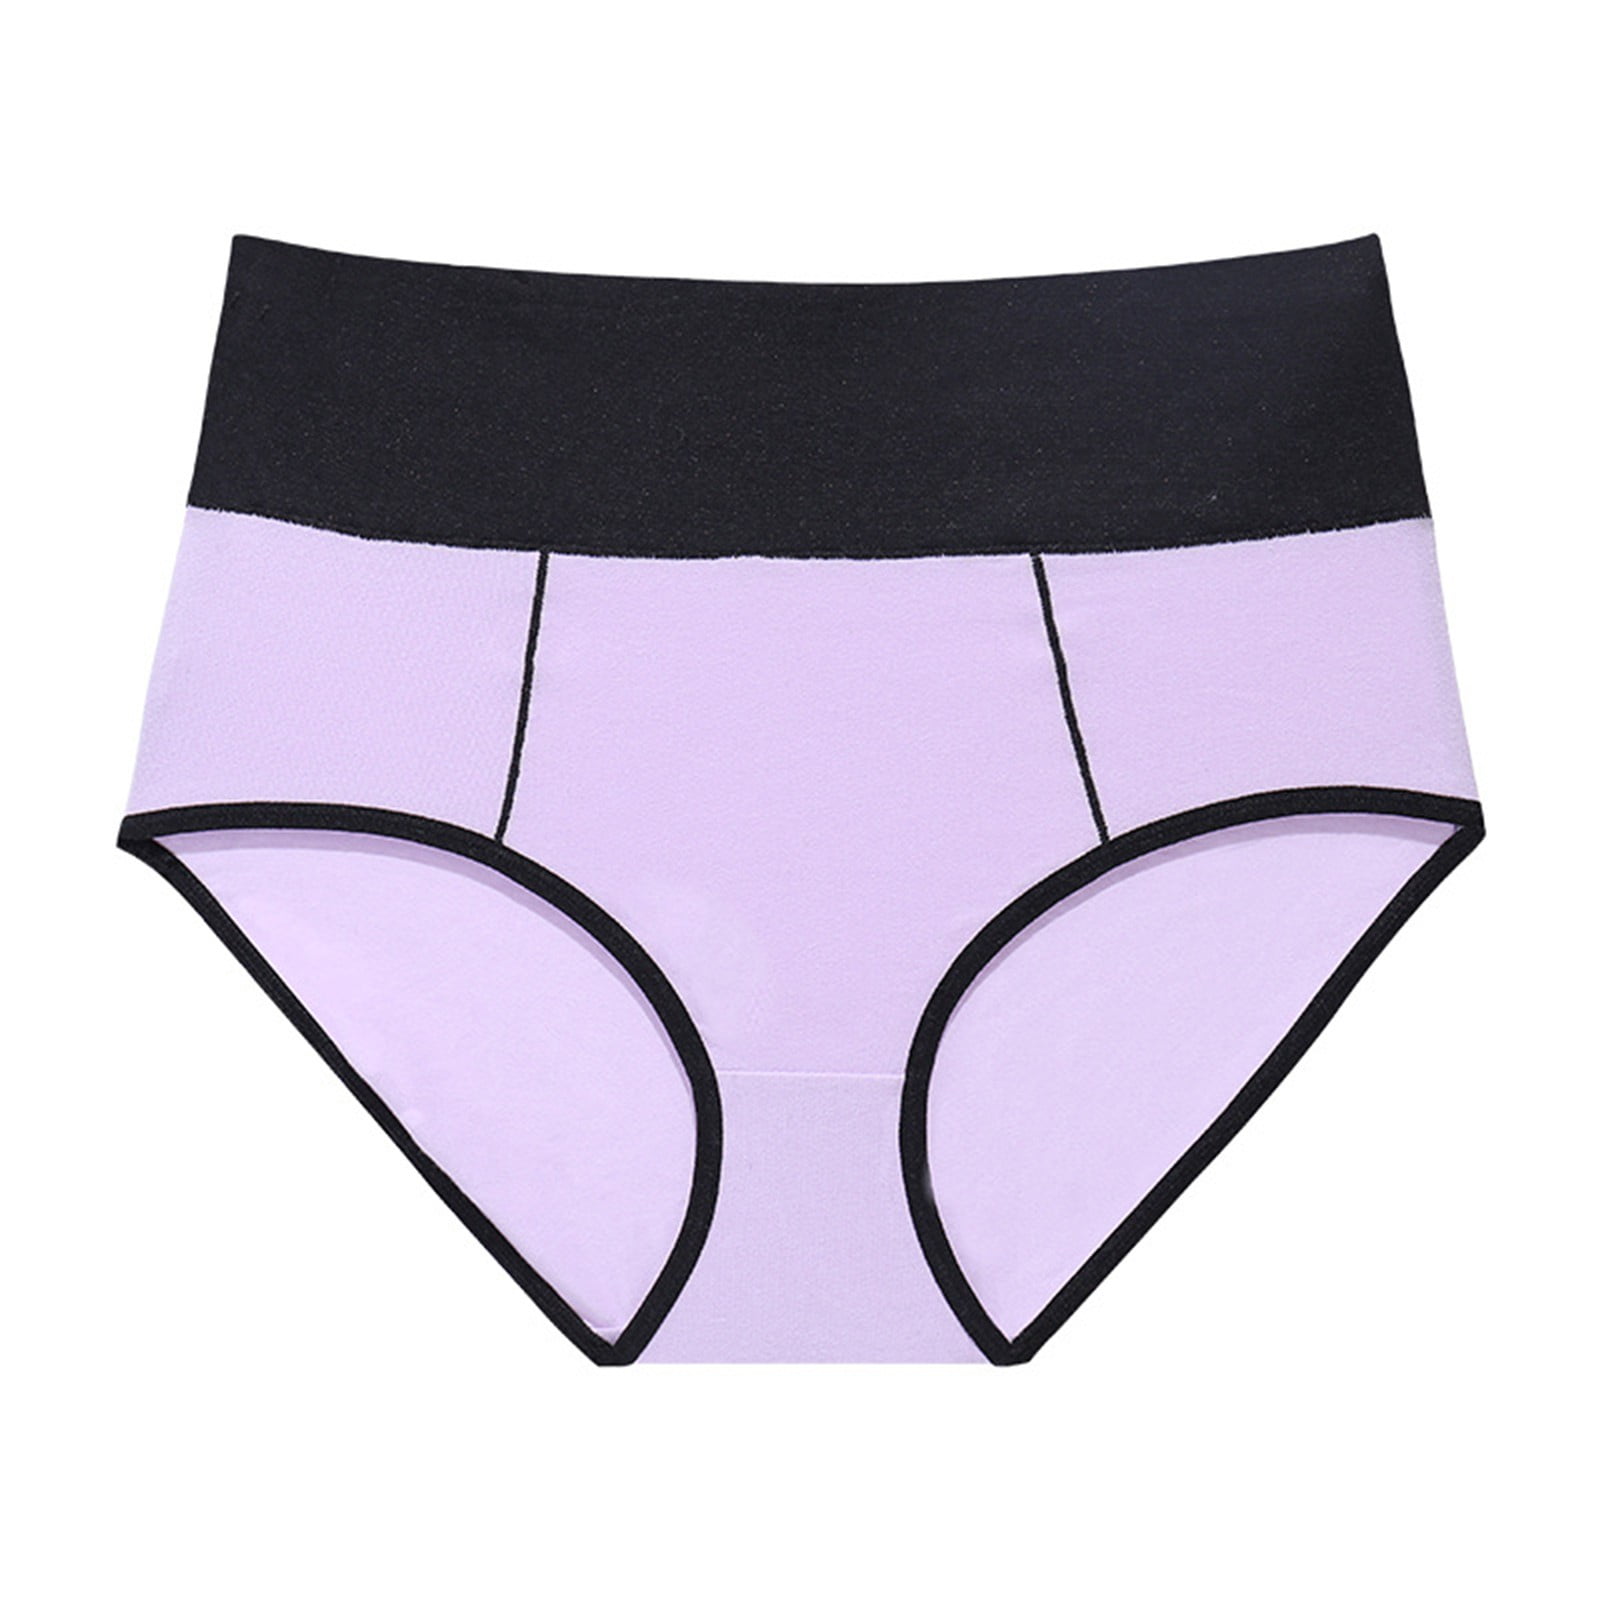 adviicd Cotton Panties No Show Underwear for Seamless High Cut Briefs  Mid-waist Soft No Panty Lines Blue Small 